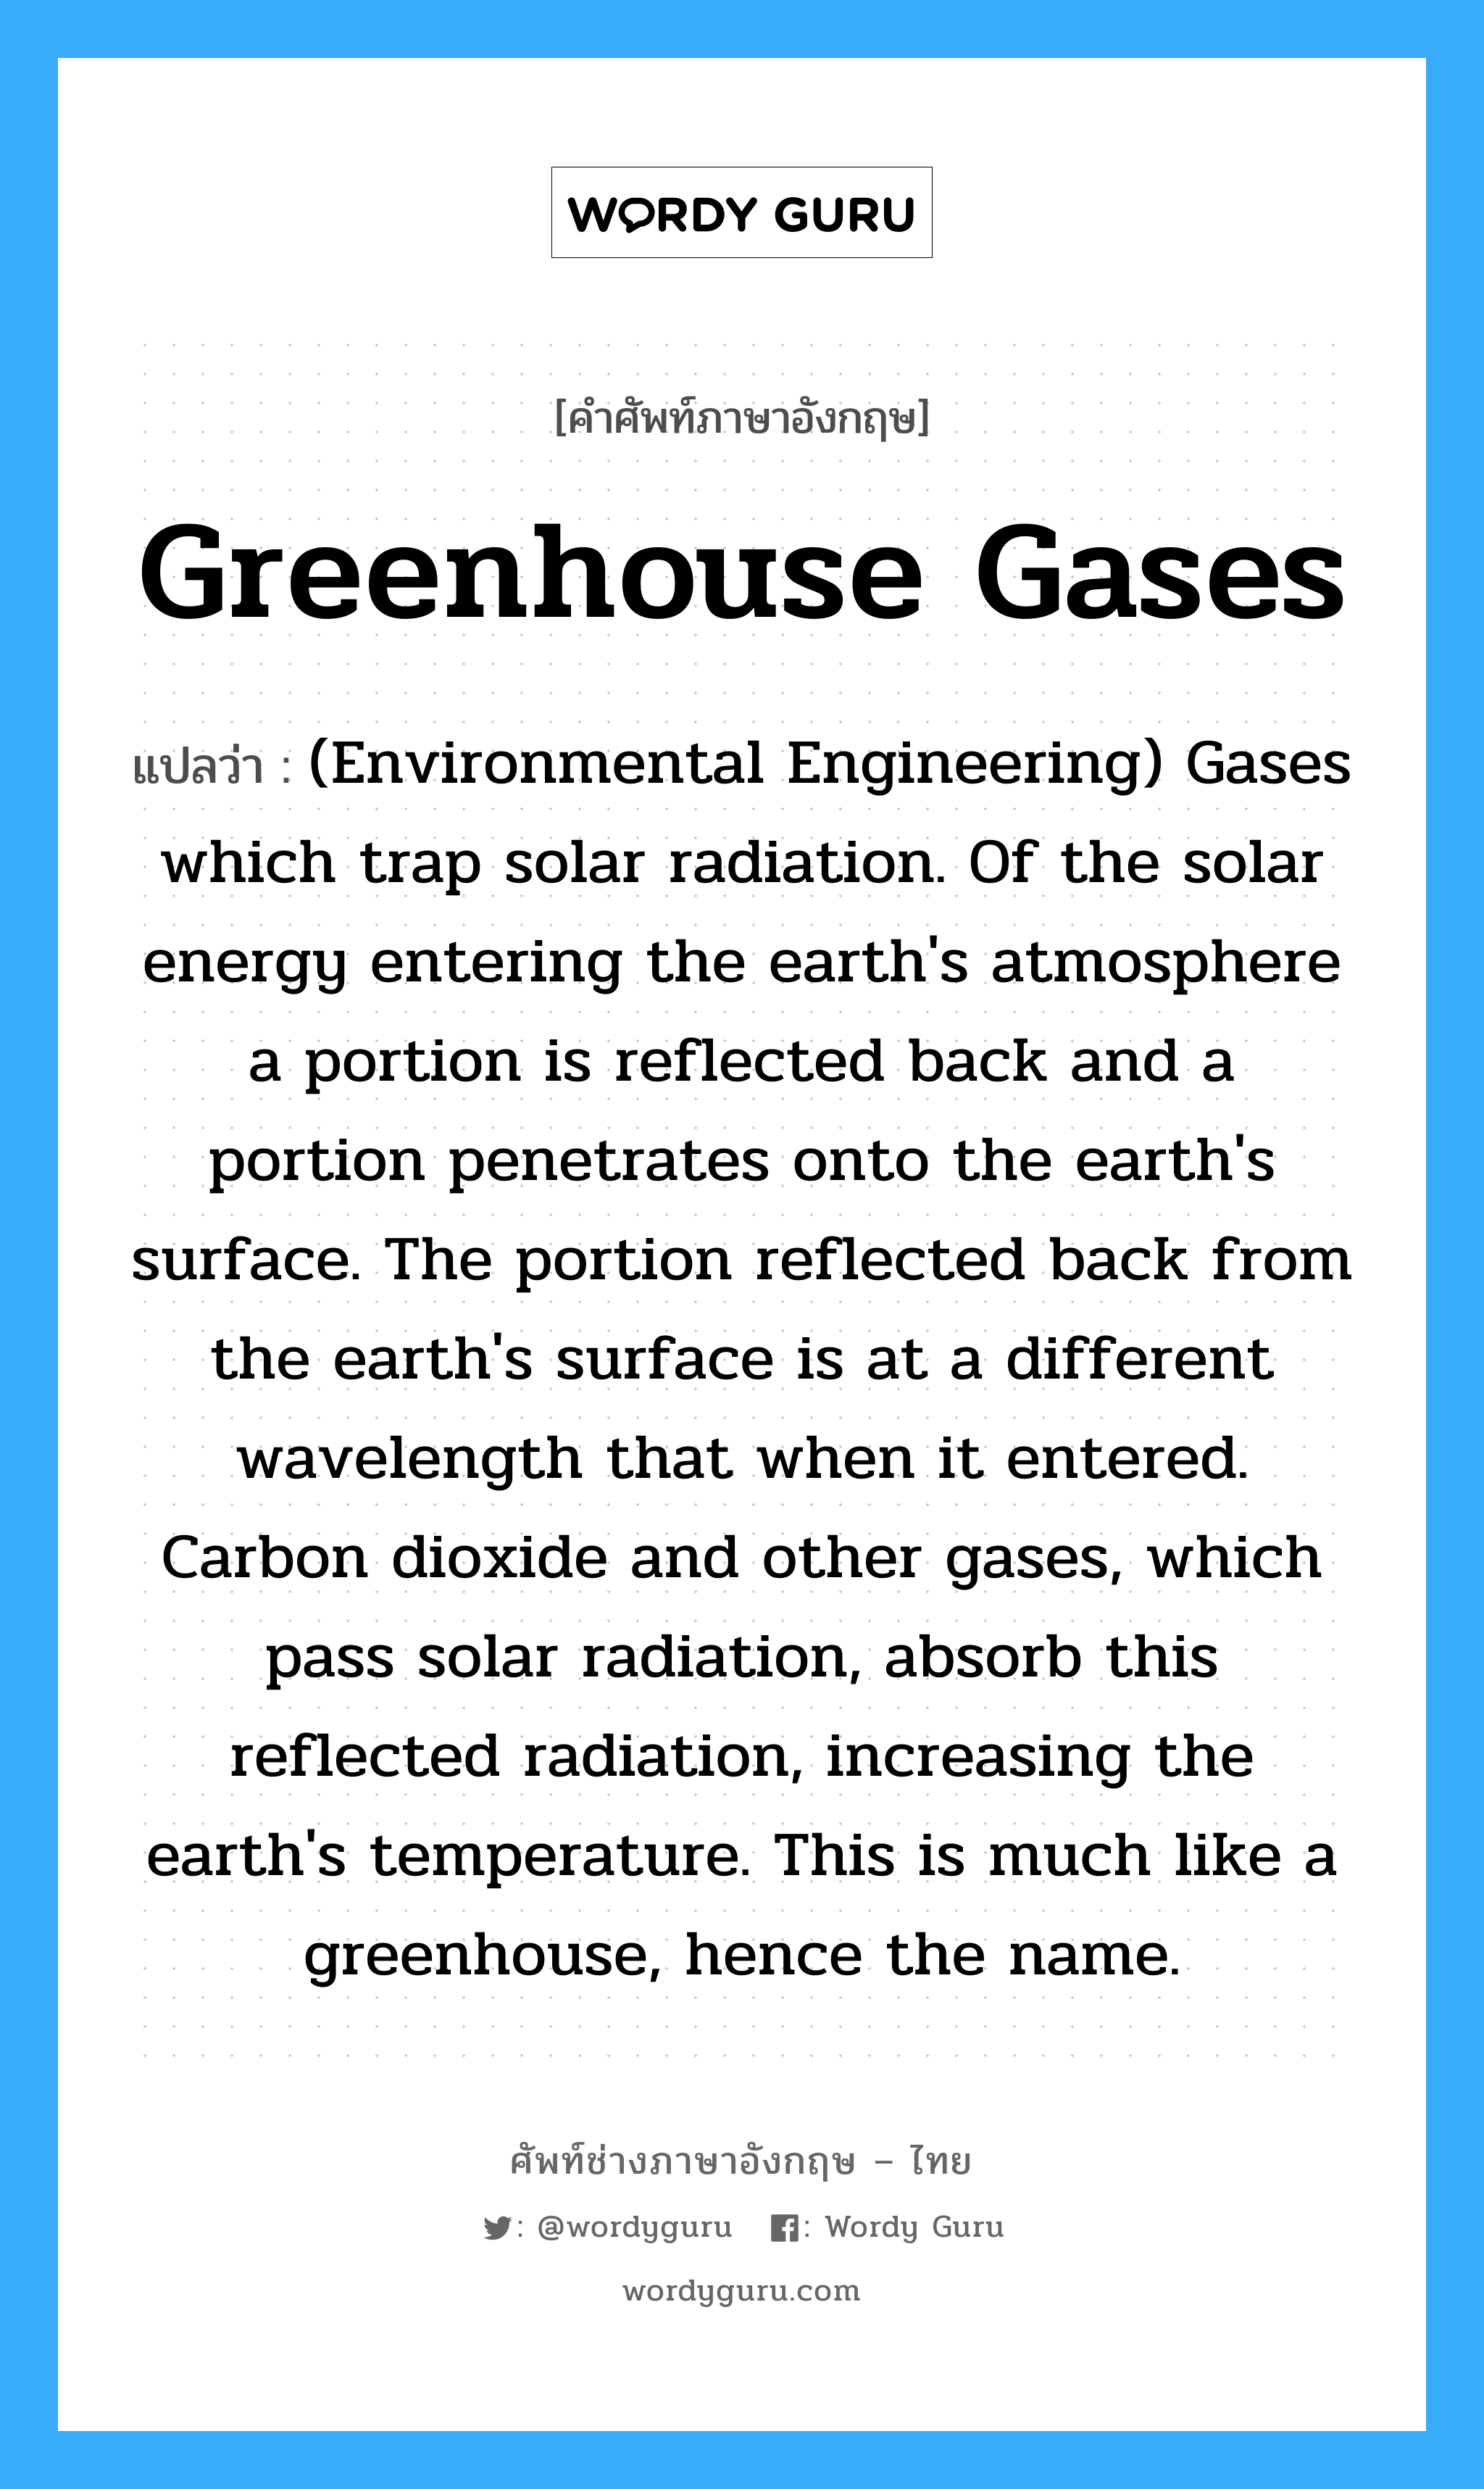 Greenhouse gases แปลว่า?, คำศัพท์ช่างภาษาอังกฤษ - ไทย Greenhouse gases คำศัพท์ภาษาอังกฤษ Greenhouse gases แปลว่า (Environmental Engineering) Gases which trap solar radiation. Of the solar energy entering the earth's atmosphere a portion is reflected back and a portion penetrates onto the earth's surface. The portion reflected back from the earth's surface is at a different wavelength that when it entered. Carbon dioxide and other gases, which pass solar radiation, absorb this reflected radiation, increasing the earth's temperature. This is much like a greenhouse, hence the name.